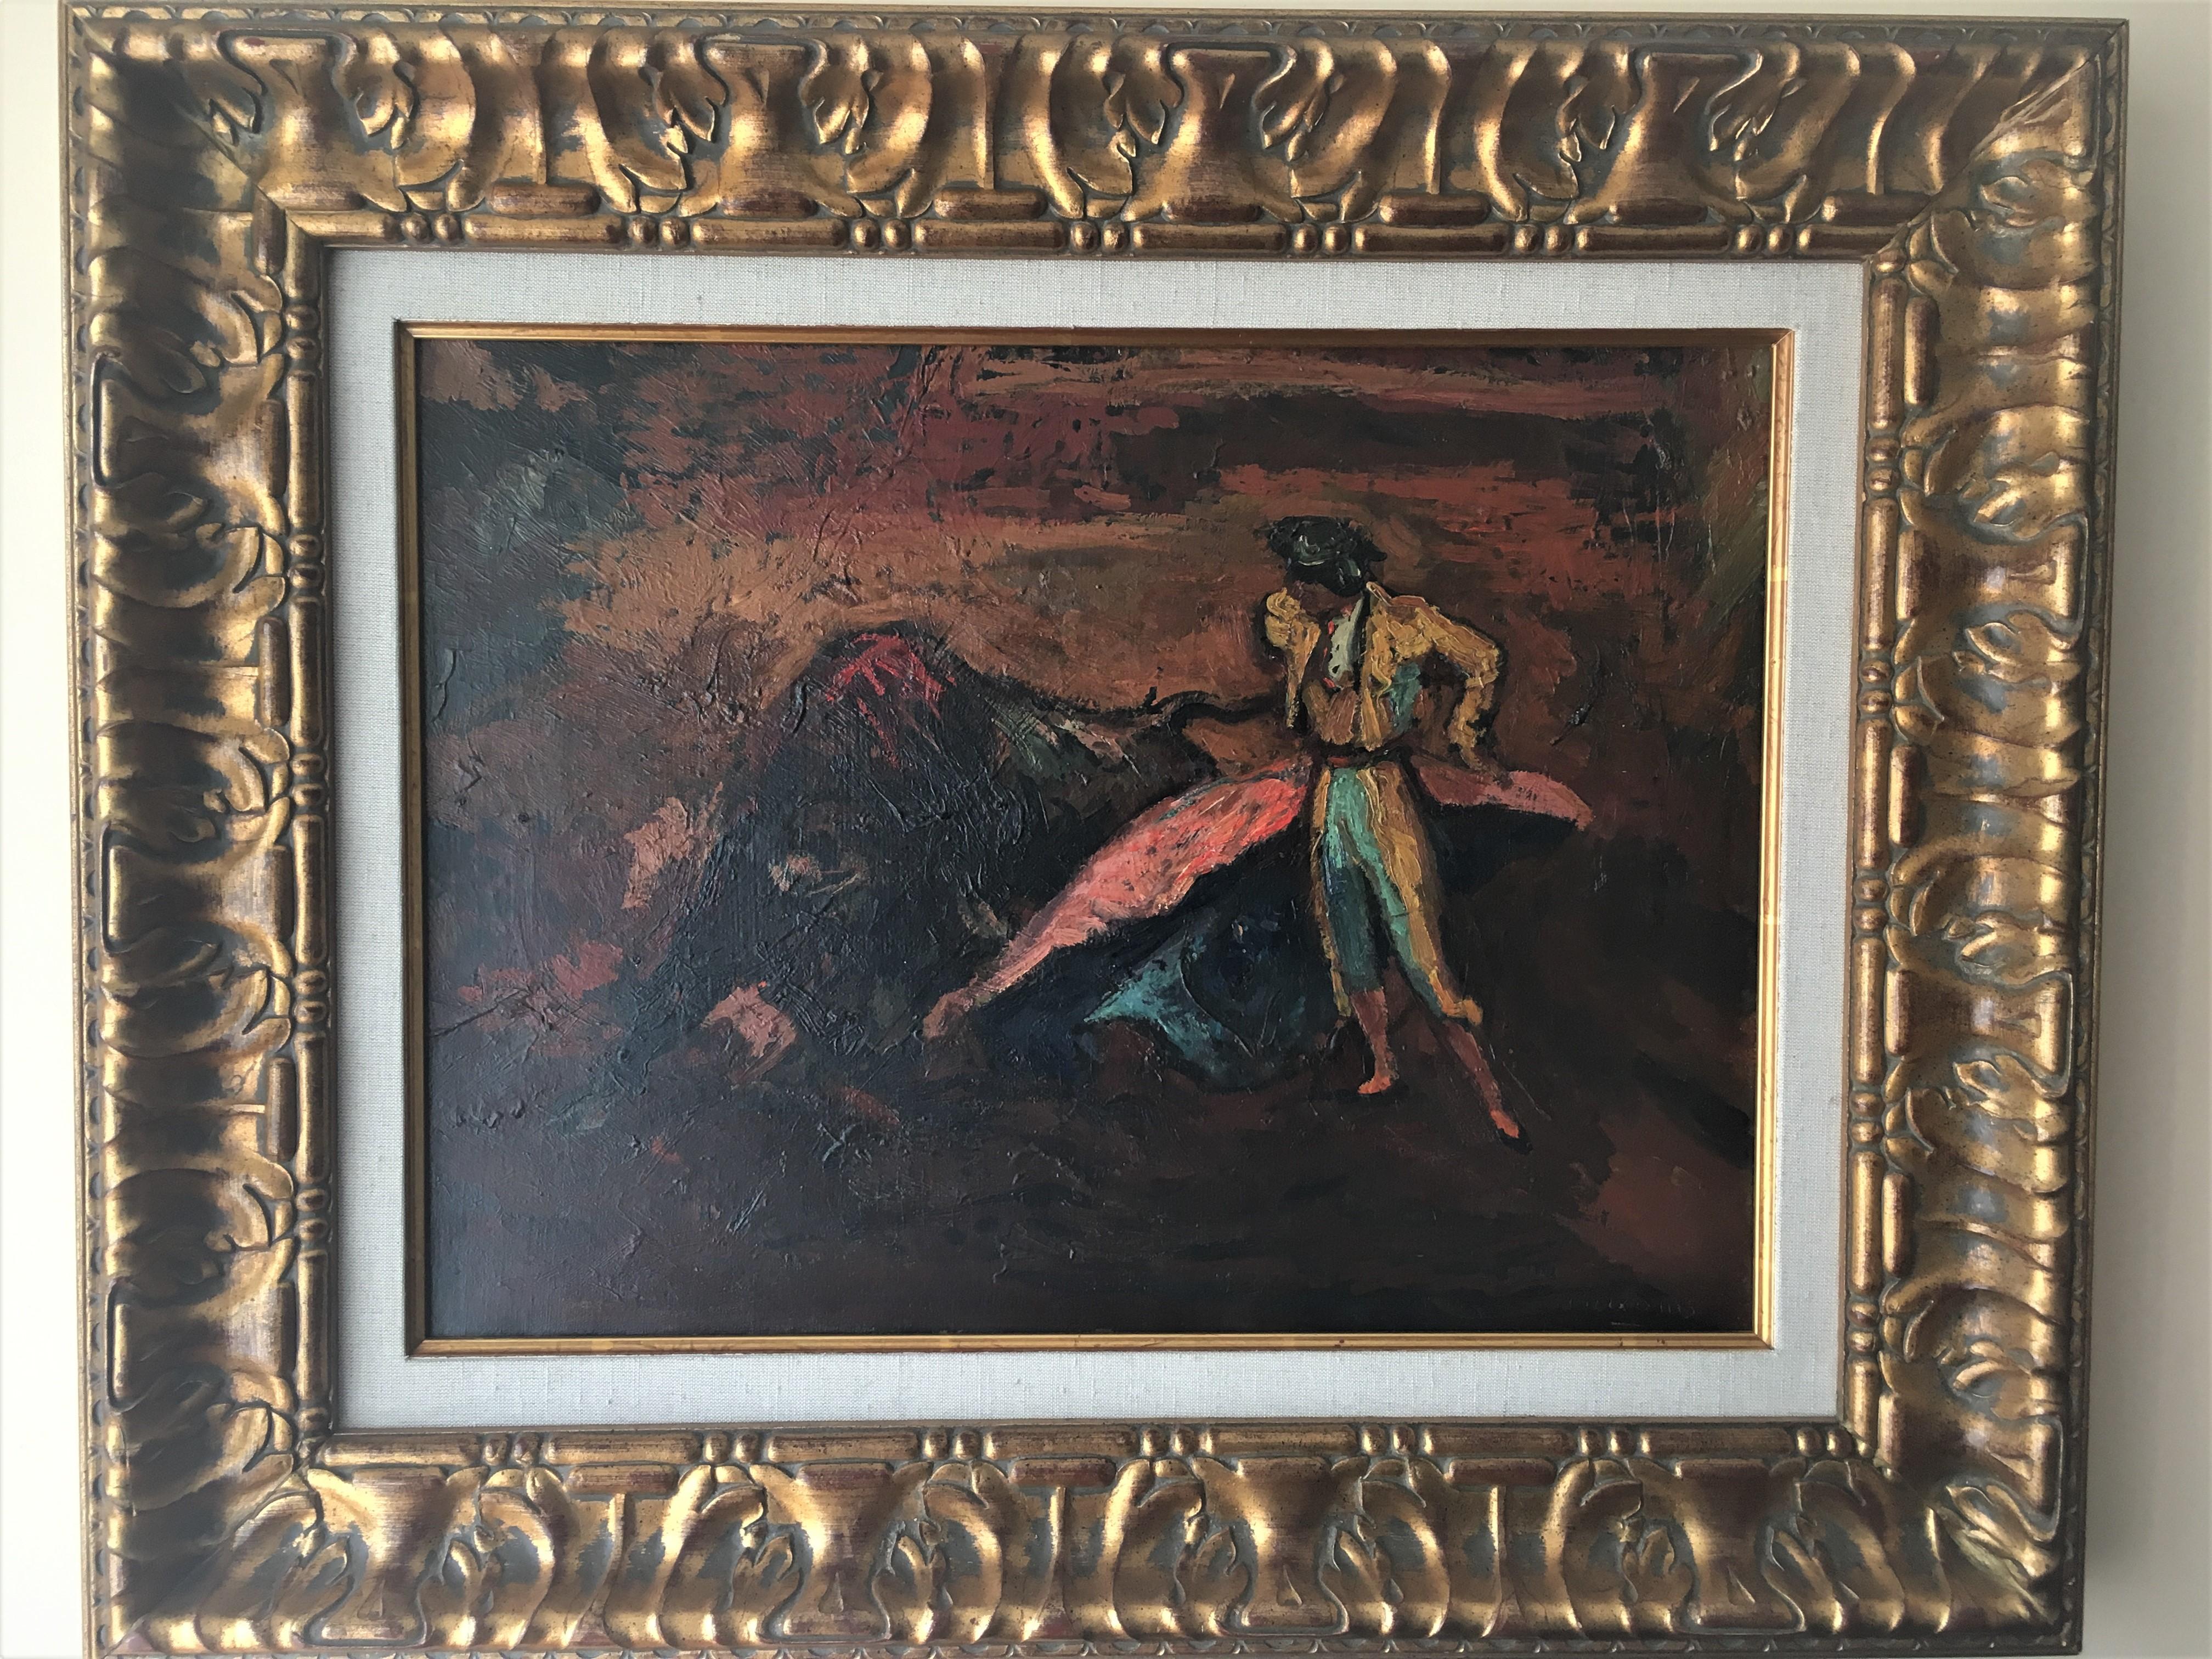 Creixams  14 Bullfighter and Bull original impressionist acrylic canvas painting - Painting by Pere Créixams Picó